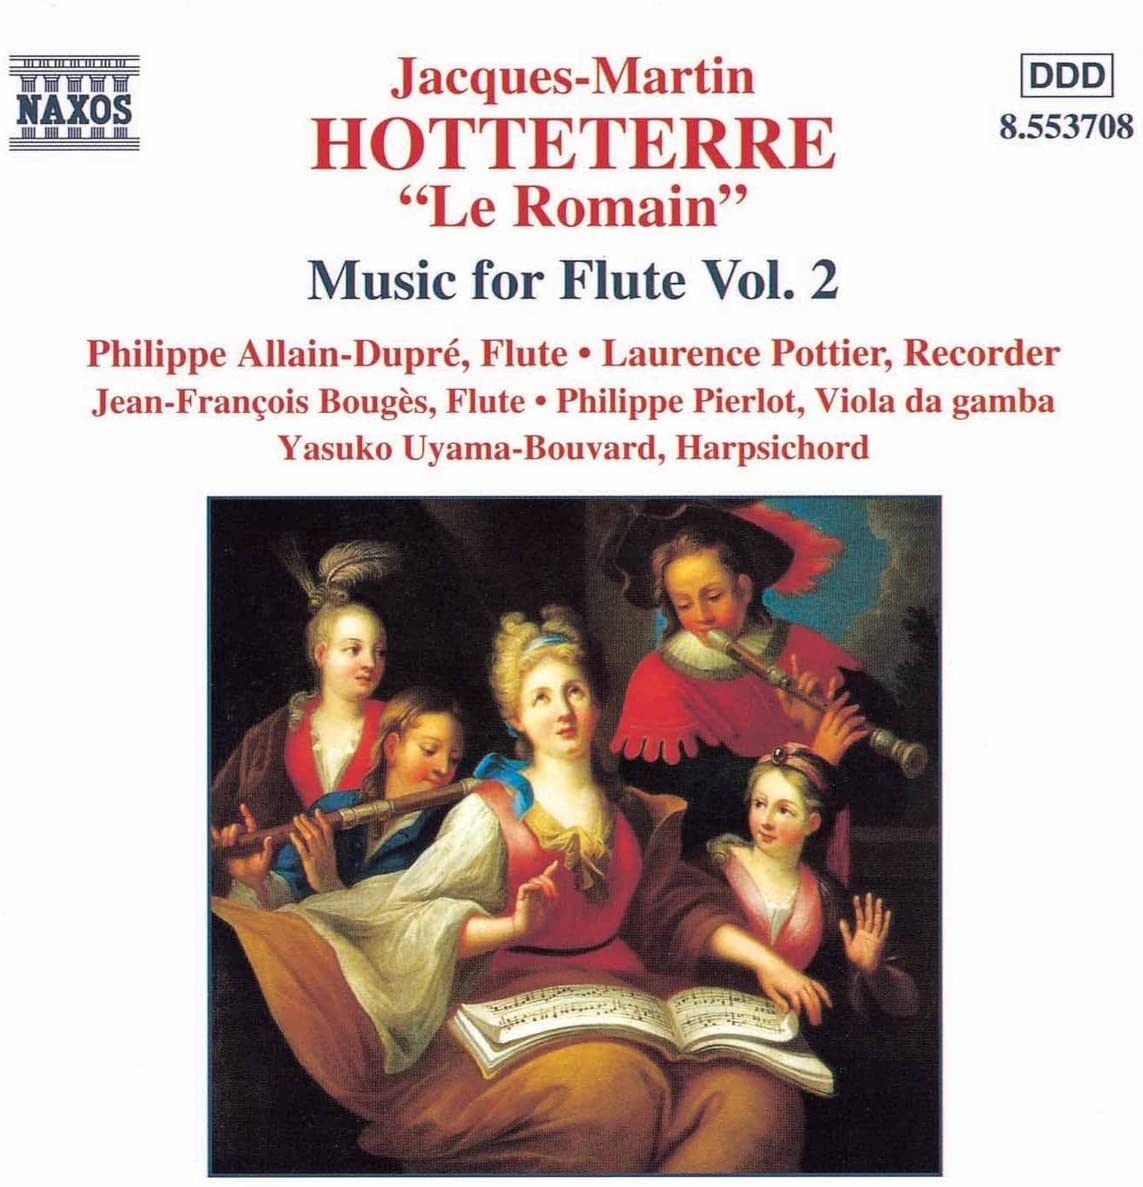 HOTTETERRE: Music for Flute vol. 2